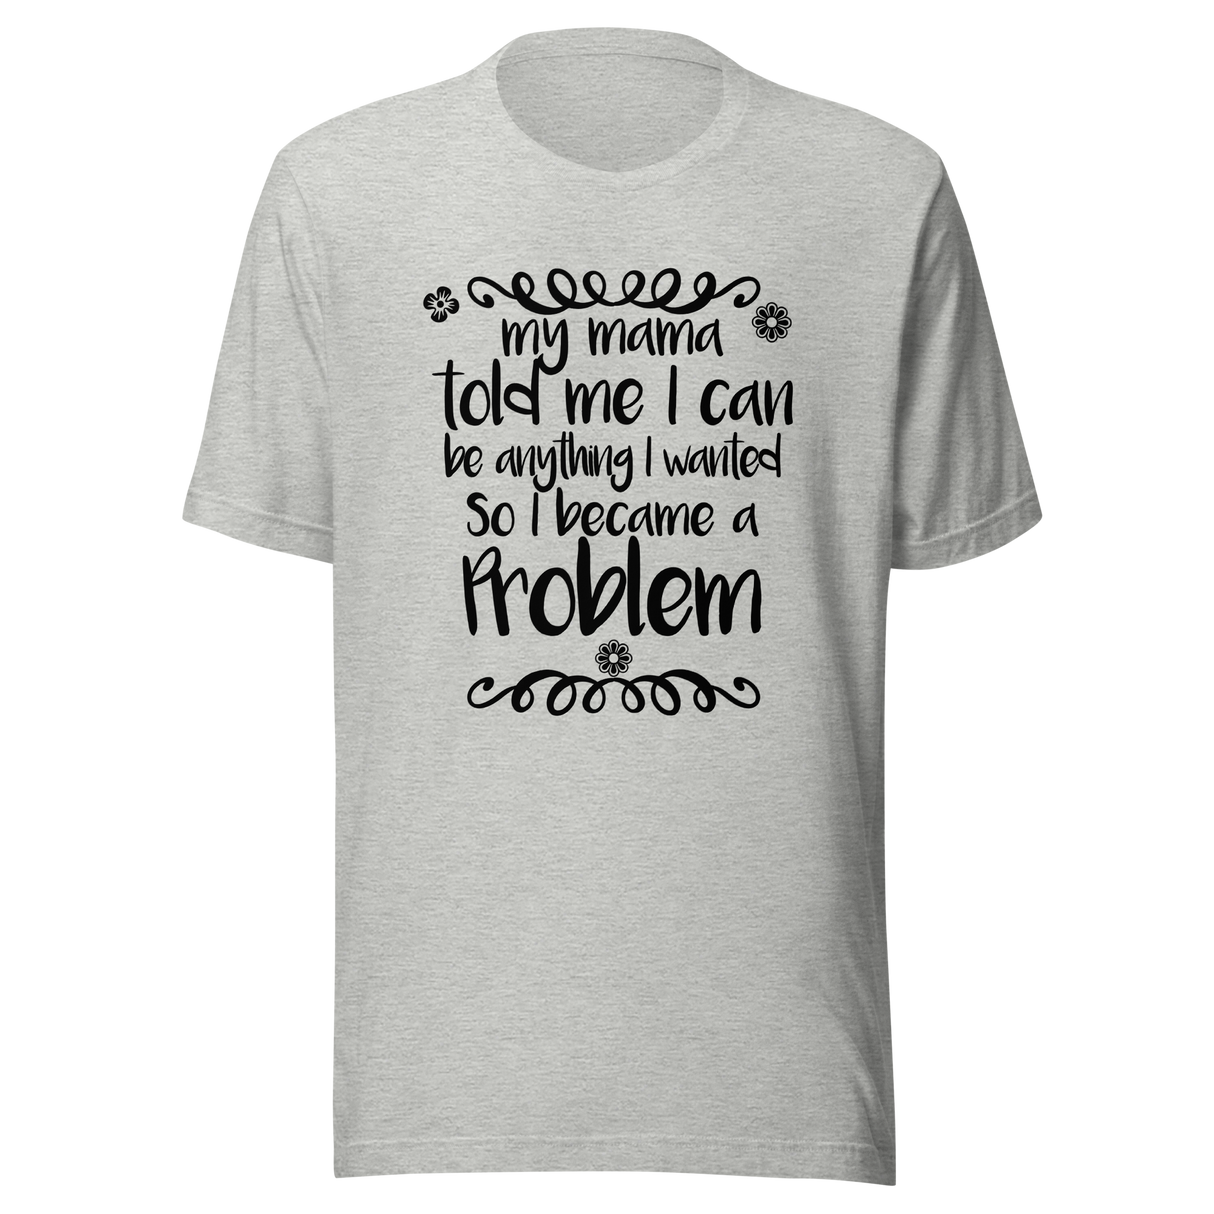 my-mama-told-me-i-can-be-whatever-i-wanted-so-i-became-a-problem-mama-tee-problem-t-shirt-funny-tee-t-shirt-tee#color_athletic-heather